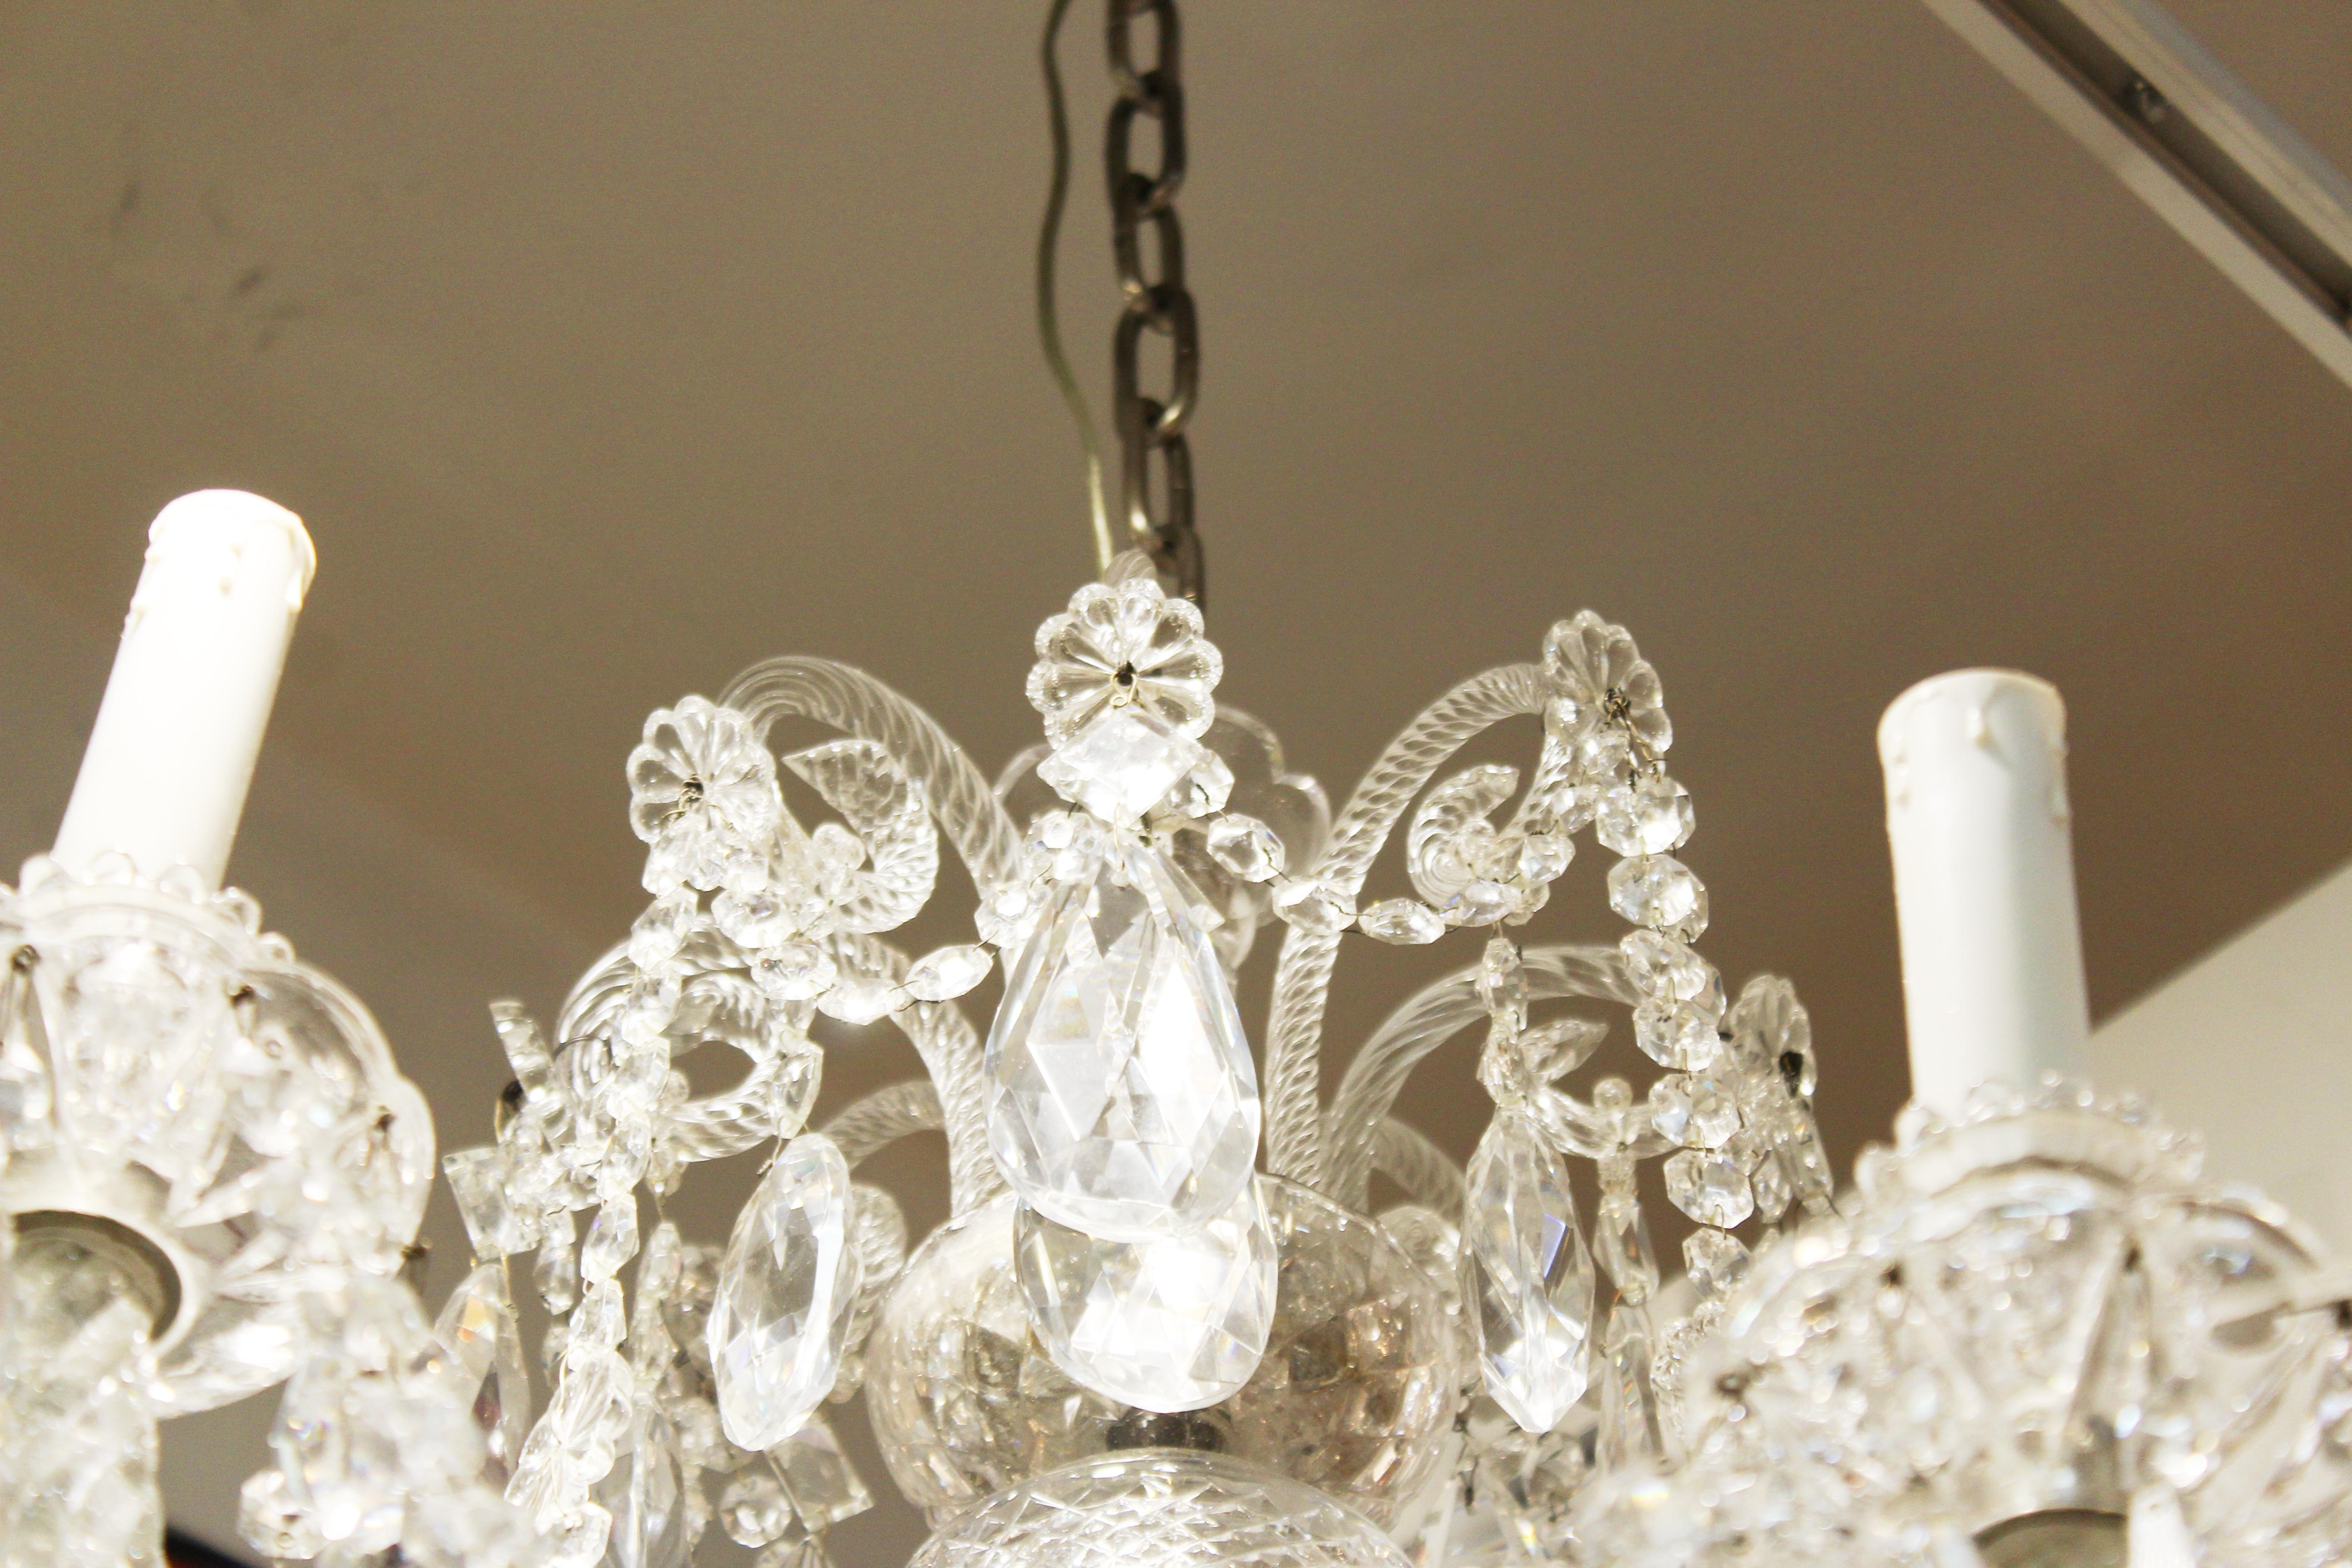 Martinez y Ortz Neoclassical Style Crystal Chandelier For Sale 4